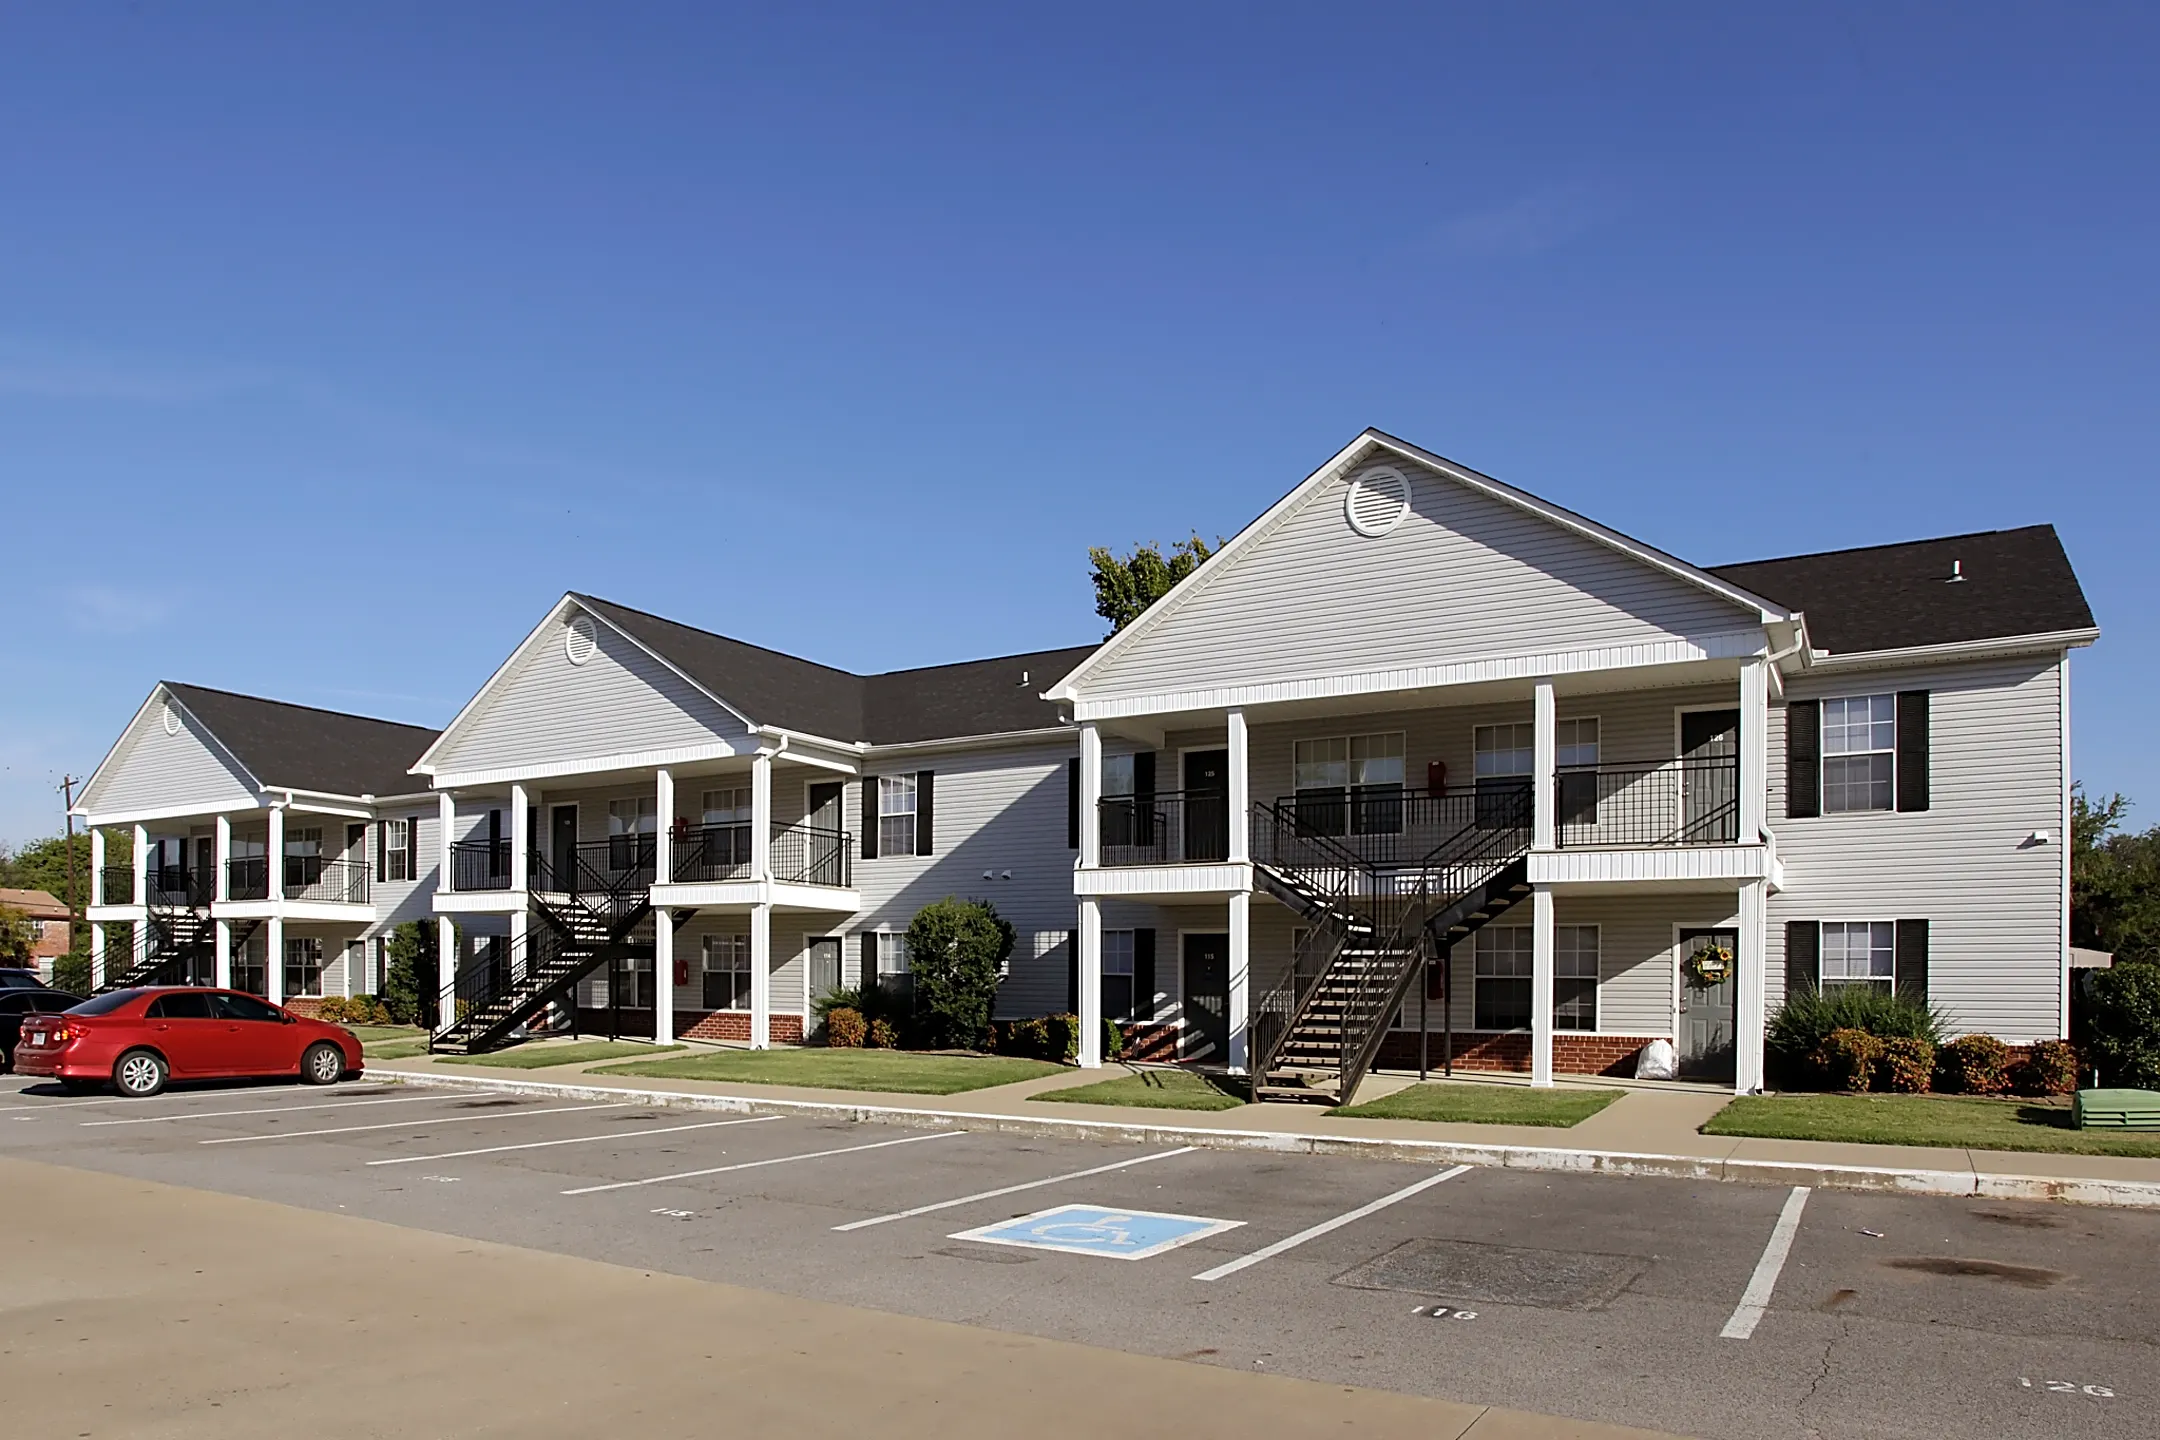 Building - Addison Place Apartments - Fort Smith, AR